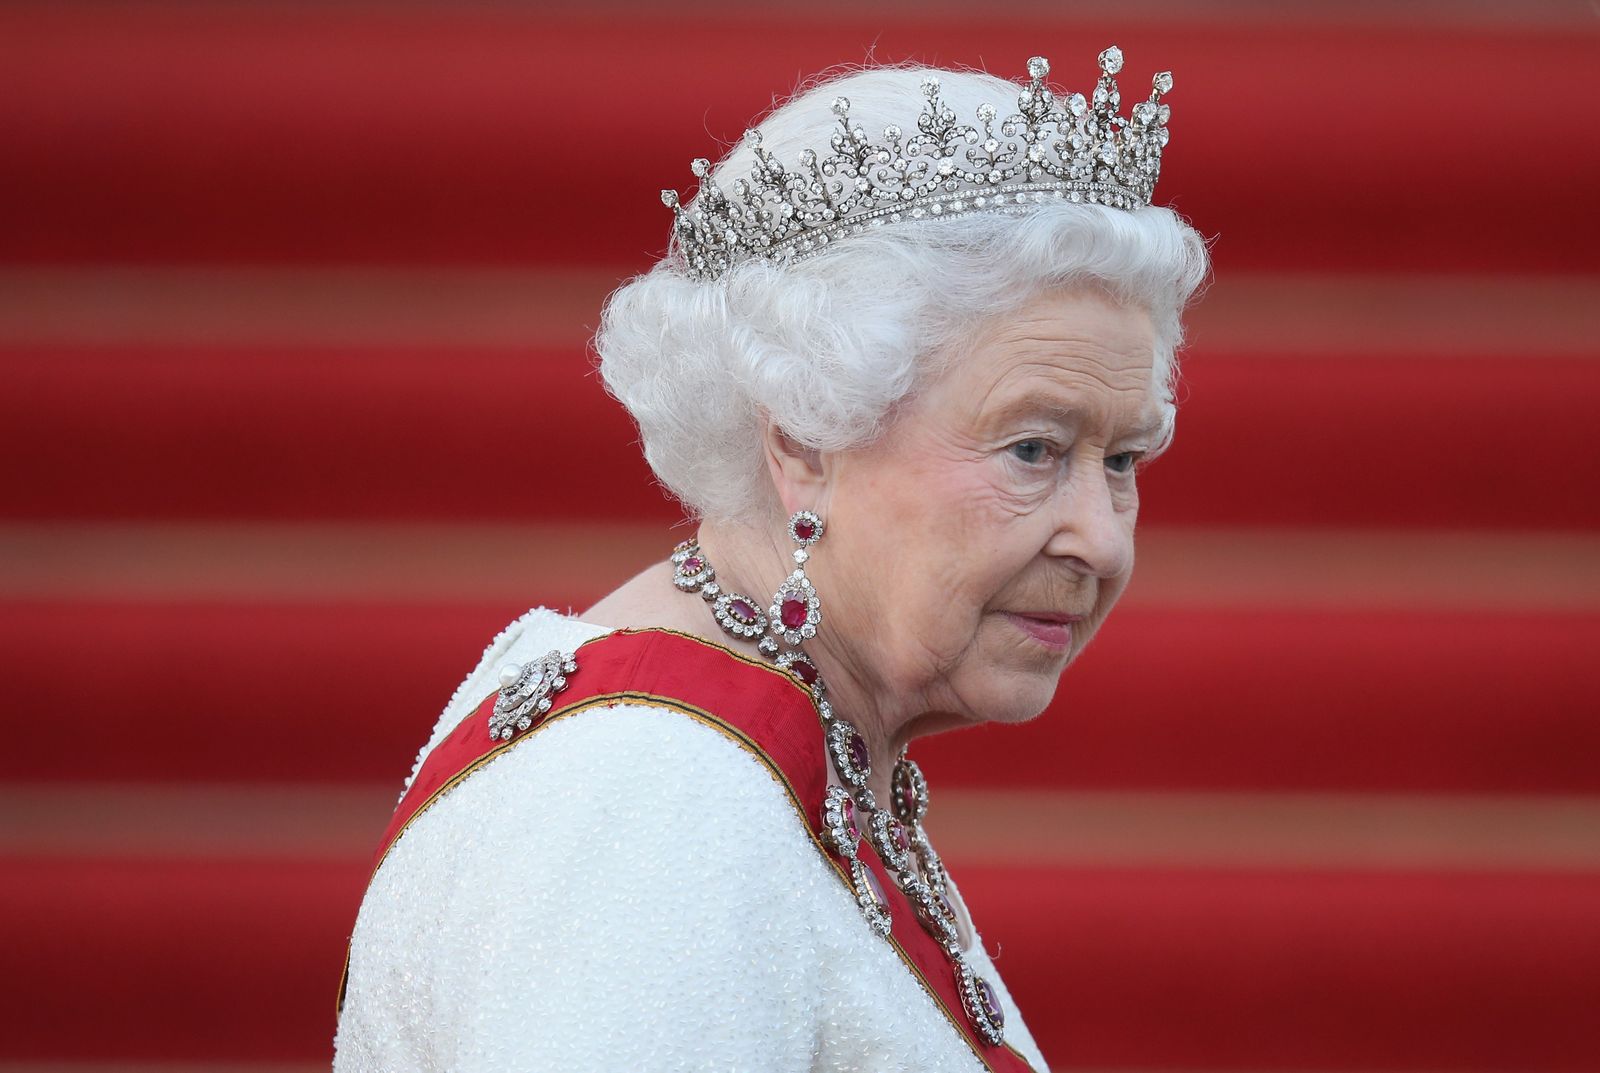 Queen Elizabeth's Tip For Wearing Crown May Be Warning for King Charles